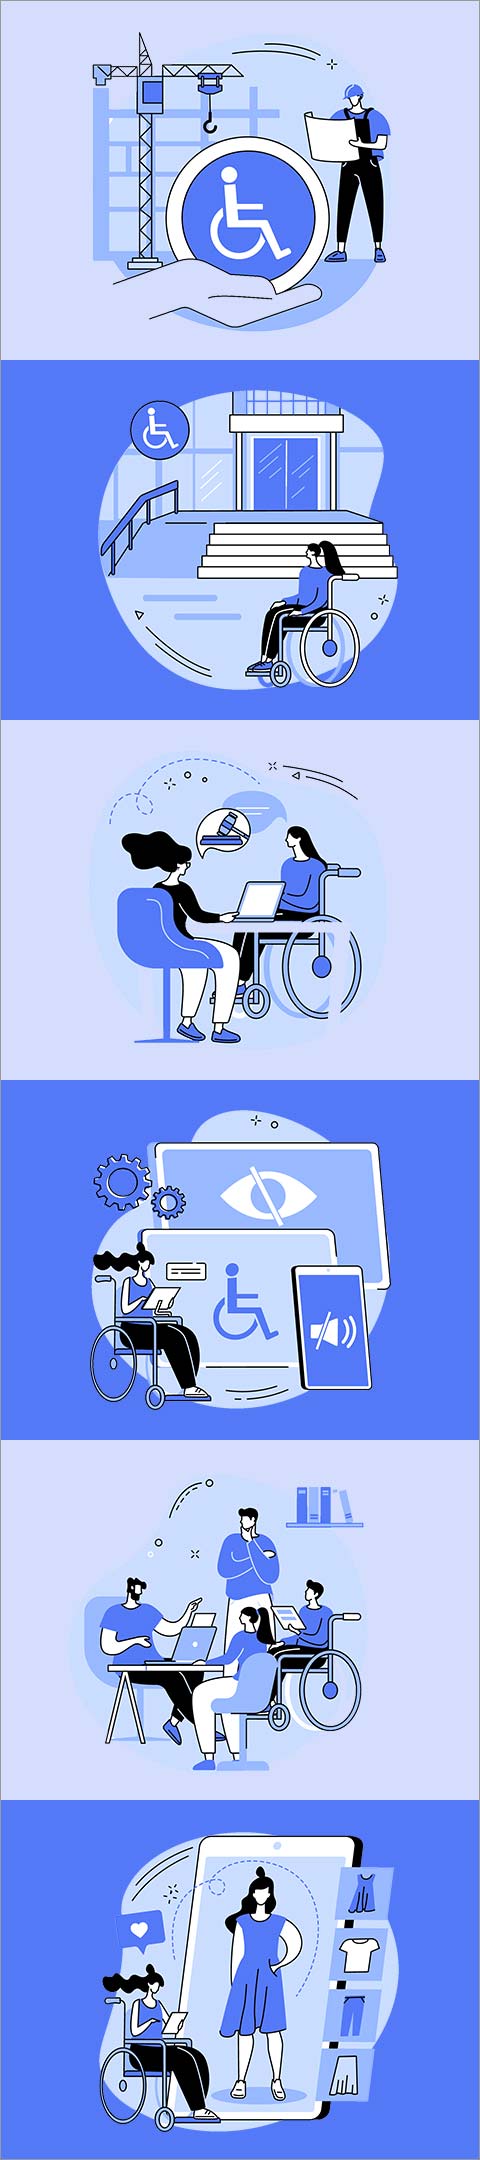 Six square boxes of the same size stacked two over four alternate colors between light and dark blue. Inside each box is an illustration of a person with a disability using access information to improve their life.